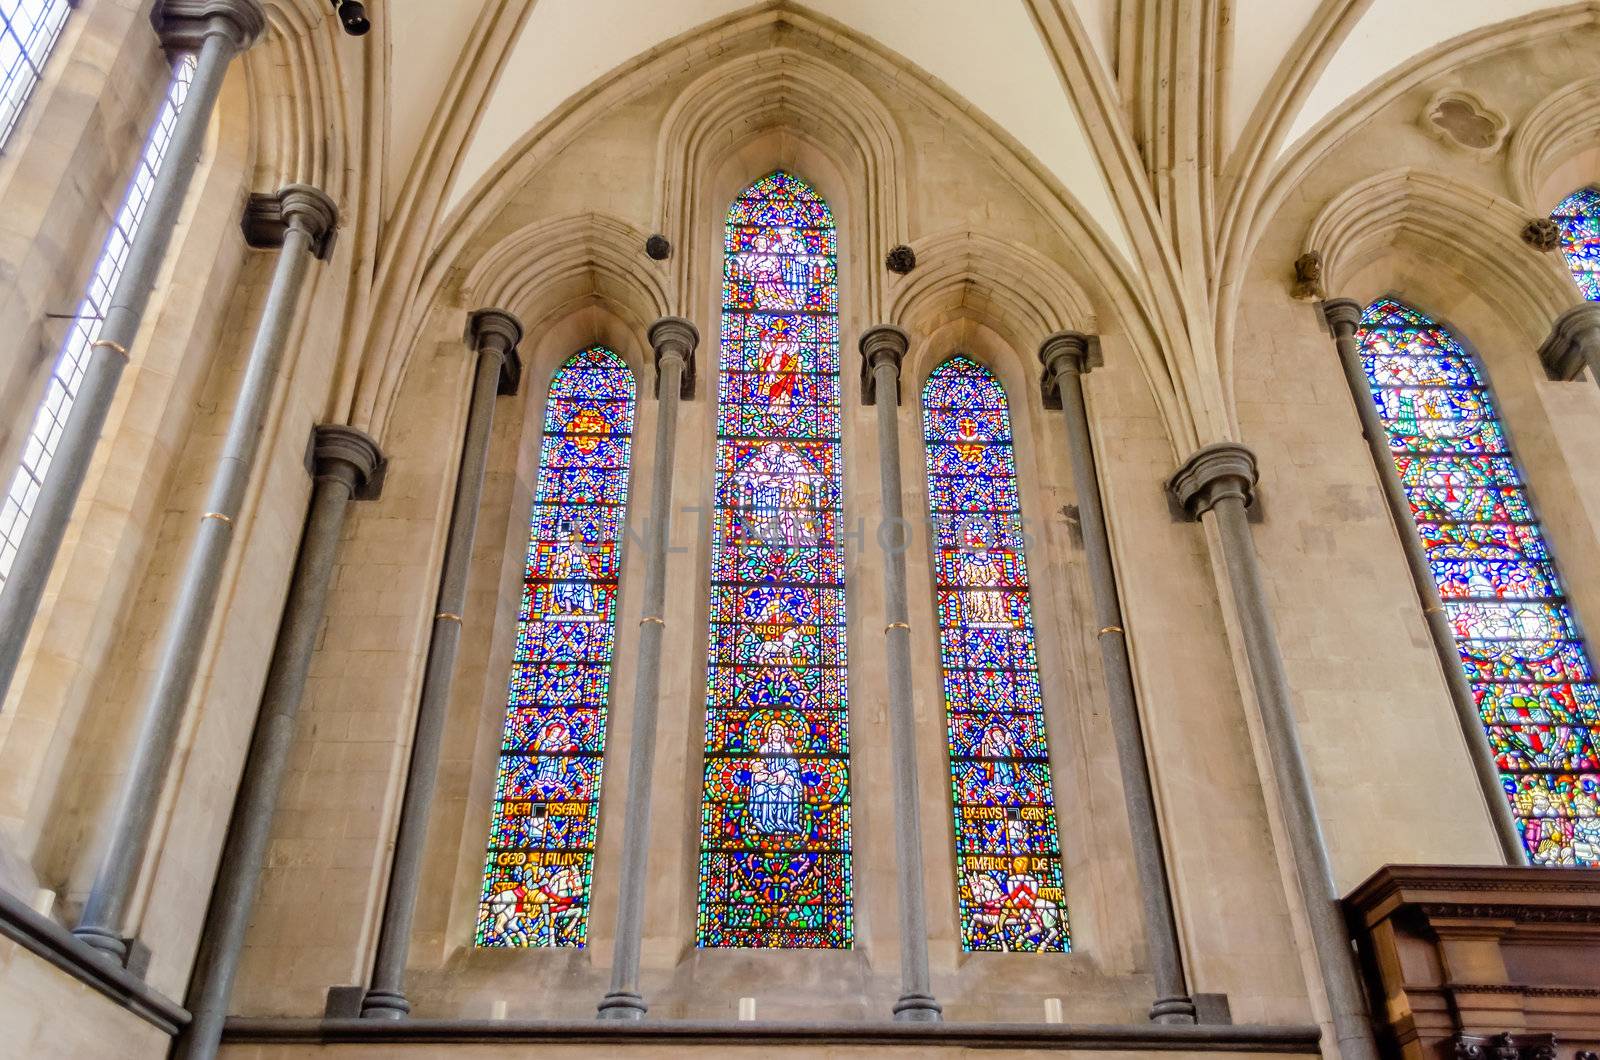 Stained-glass windows at Temple Church, London, UK